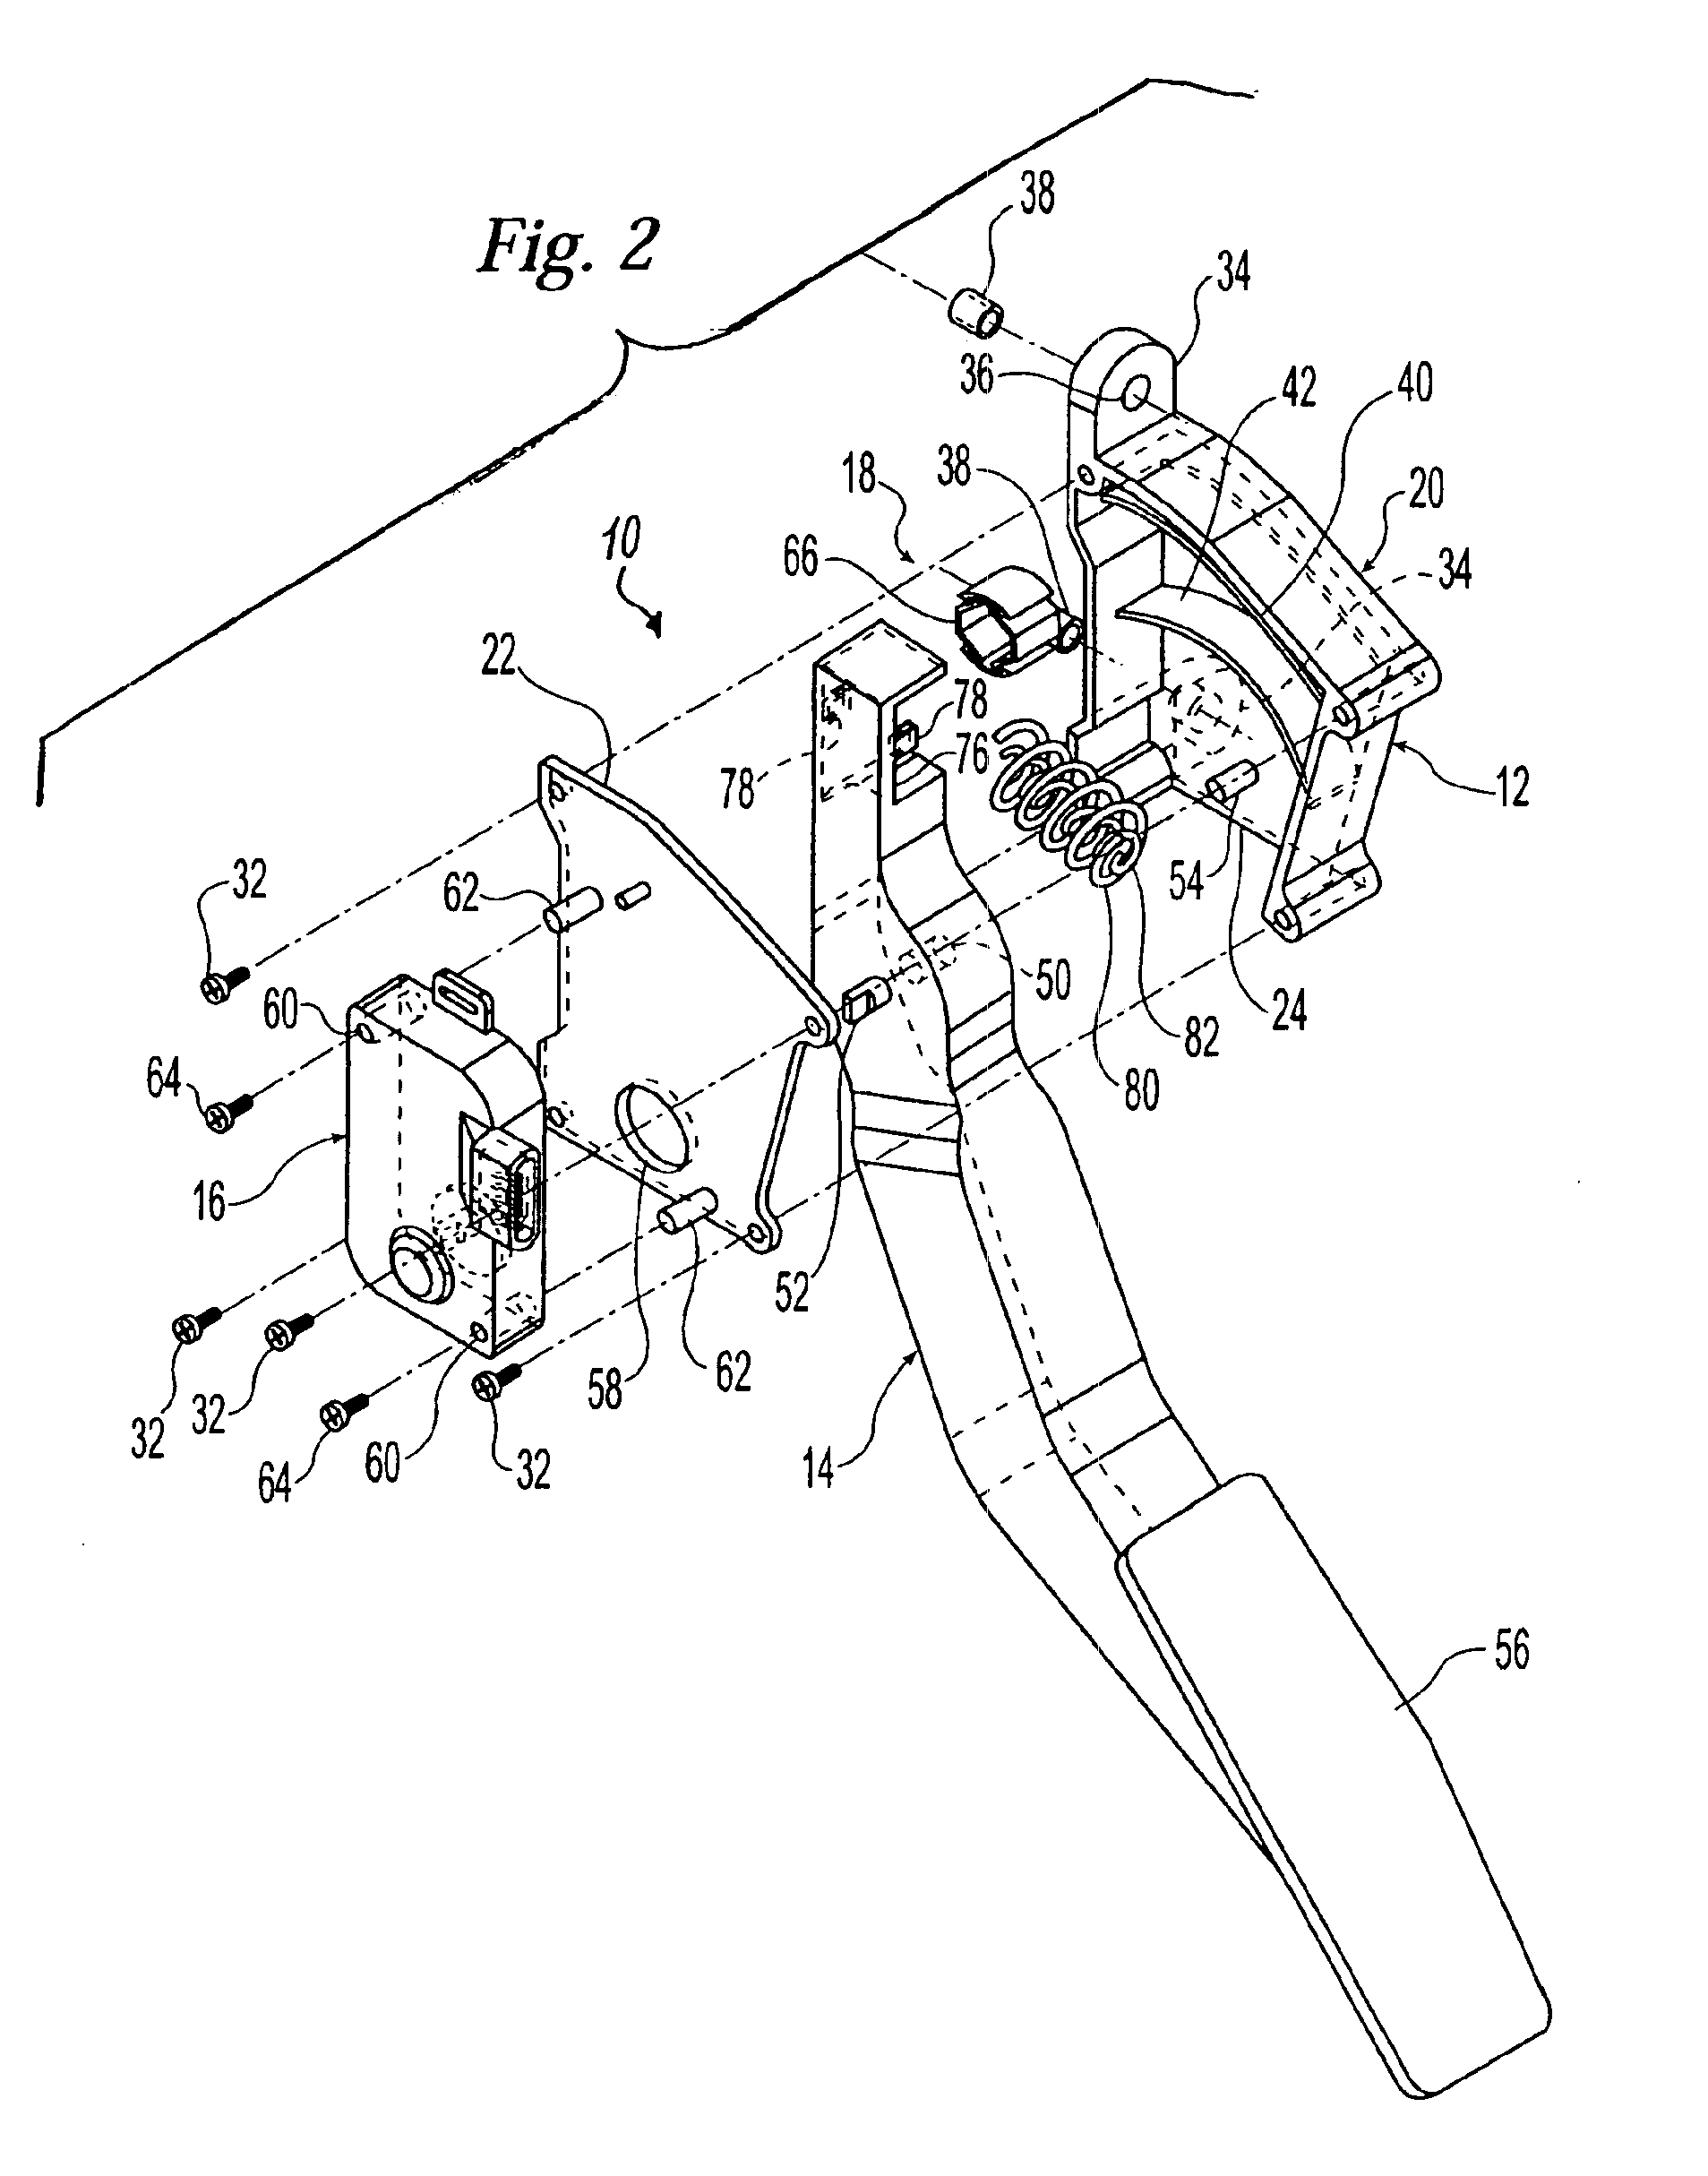 Electronic throttle control hysteresis mechanism